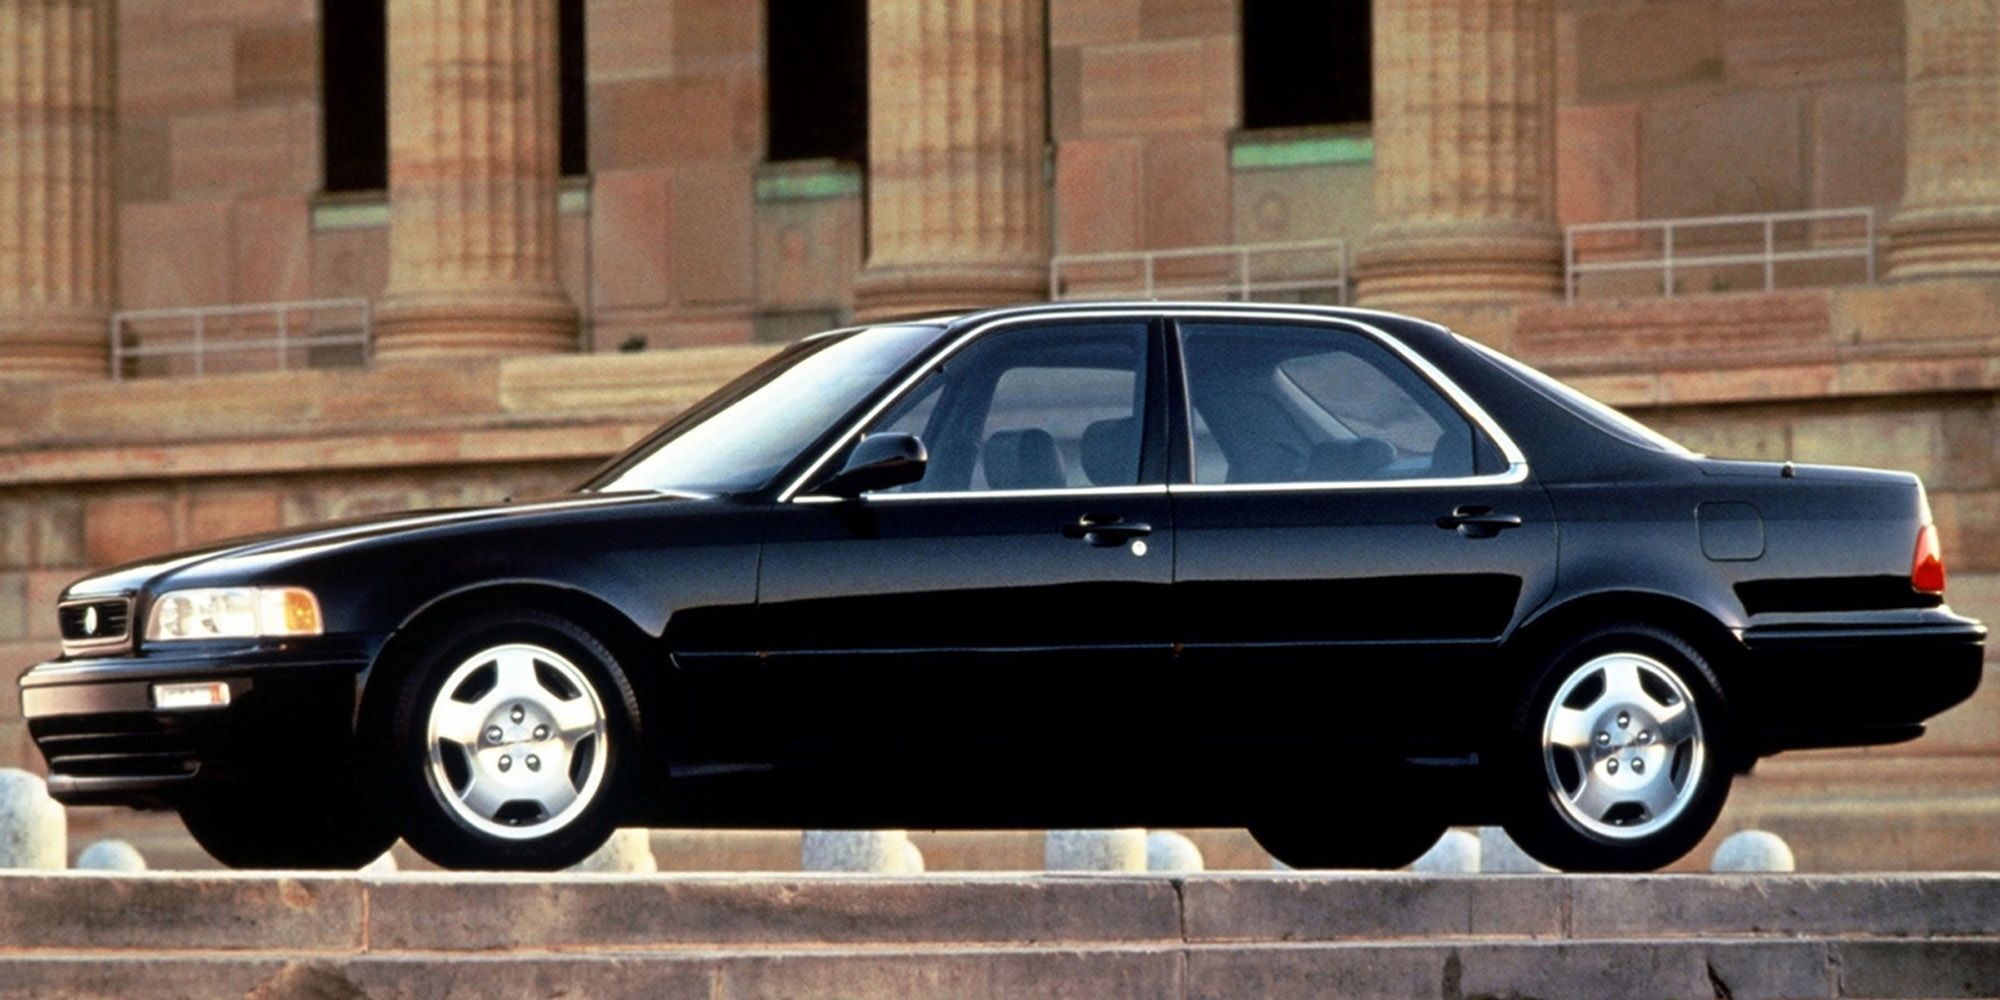 The side profile of the first generation Acura Legend